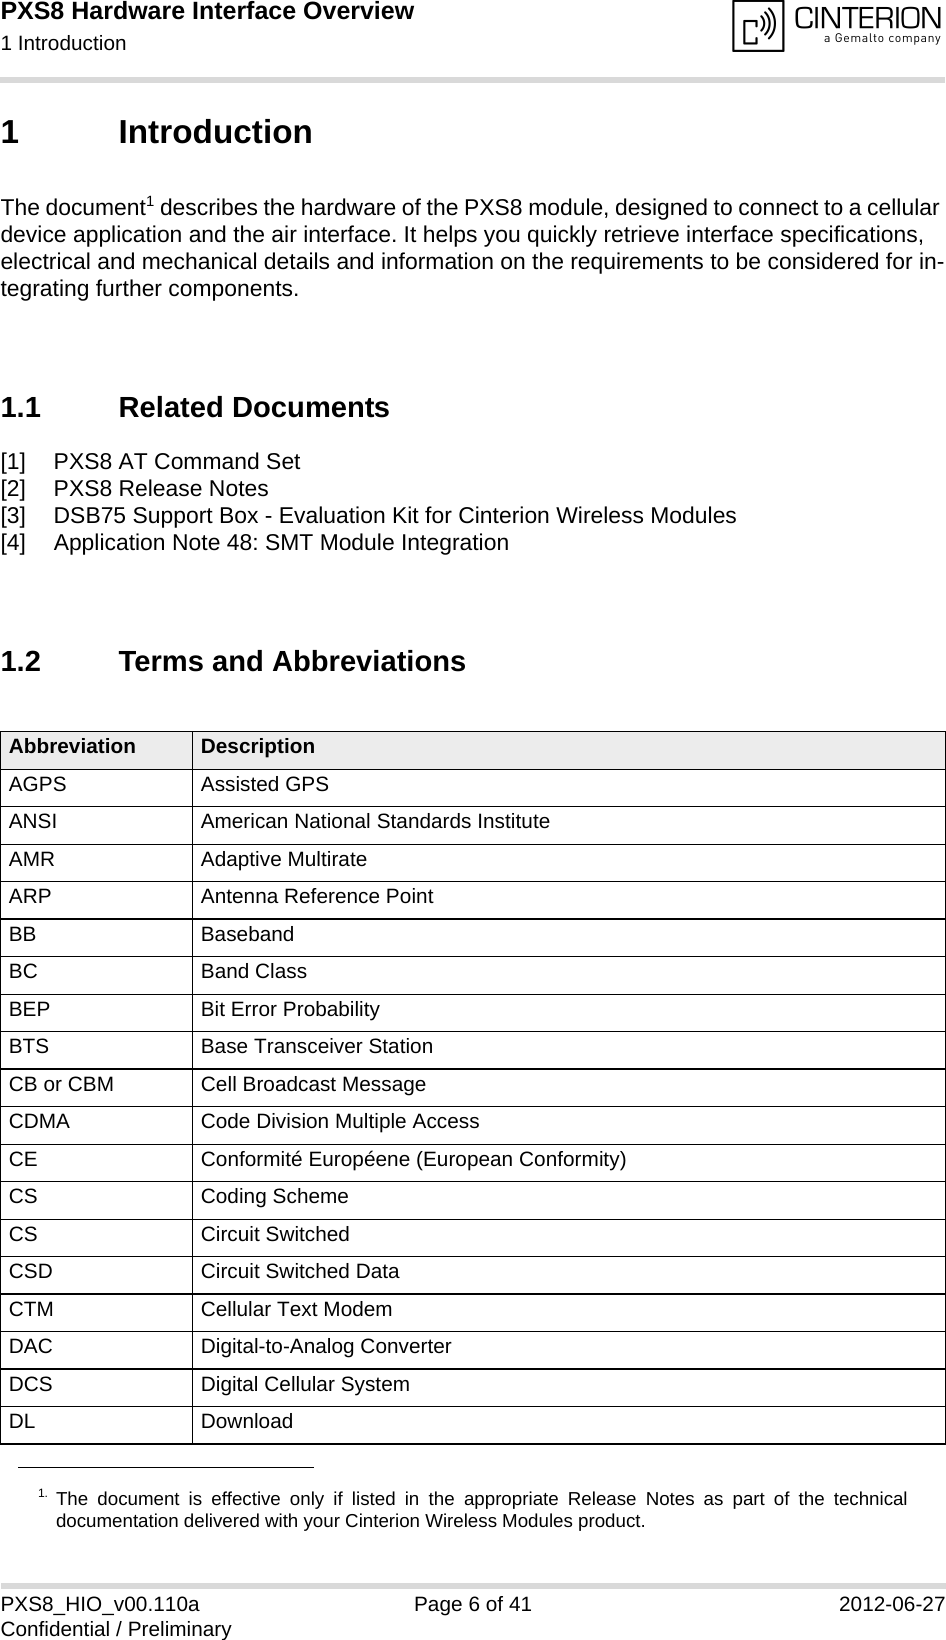 PXS8 Hardware Interface Overview1 Introduction15PXS8_HIO_v00.110a Page 6 of 41 2012-06-27Confidential / Preliminary1 IntroductionThe document1 describes the hardware of the PXS8 module, designed to connect to a cellular device application and the air interface. It helps you quickly retrieve interface specifications, electrical and mechanical details and information on the requirements to be considered for in-tegrating further components.1.1 Related Documents[1] PXS8 AT Command Set[2] PXS8 Release Notes[3] DSB75 Support Box - Evaluation Kit for Cinterion Wireless Modules[4] Application Note 48: SMT Module Integration1.2 Terms and Abbreviations1. The document is effective only if listed in the appropriate Release Notes as part of the technicaldocumentation delivered with your Cinterion Wireless Modules product.Abbreviation DescriptionAGPS Assisted GPSANSI American National Standards InstituteAMR Adaptive MultirateARP Antenna Reference PointBB BasebandBC Band ClassBEP Bit Error ProbabilityBTS Base Transceiver StationCB or CBM Cell Broadcast MessageCDMA Code Division Multiple AccessCE Conformité Européene (European Conformity)CS Coding SchemeCS Circuit SwitchedCSD Circuit Switched DataCTM Cellular Text ModemDAC Digital-to-Analog ConverterDCS Digital Cellular SystemDL Download